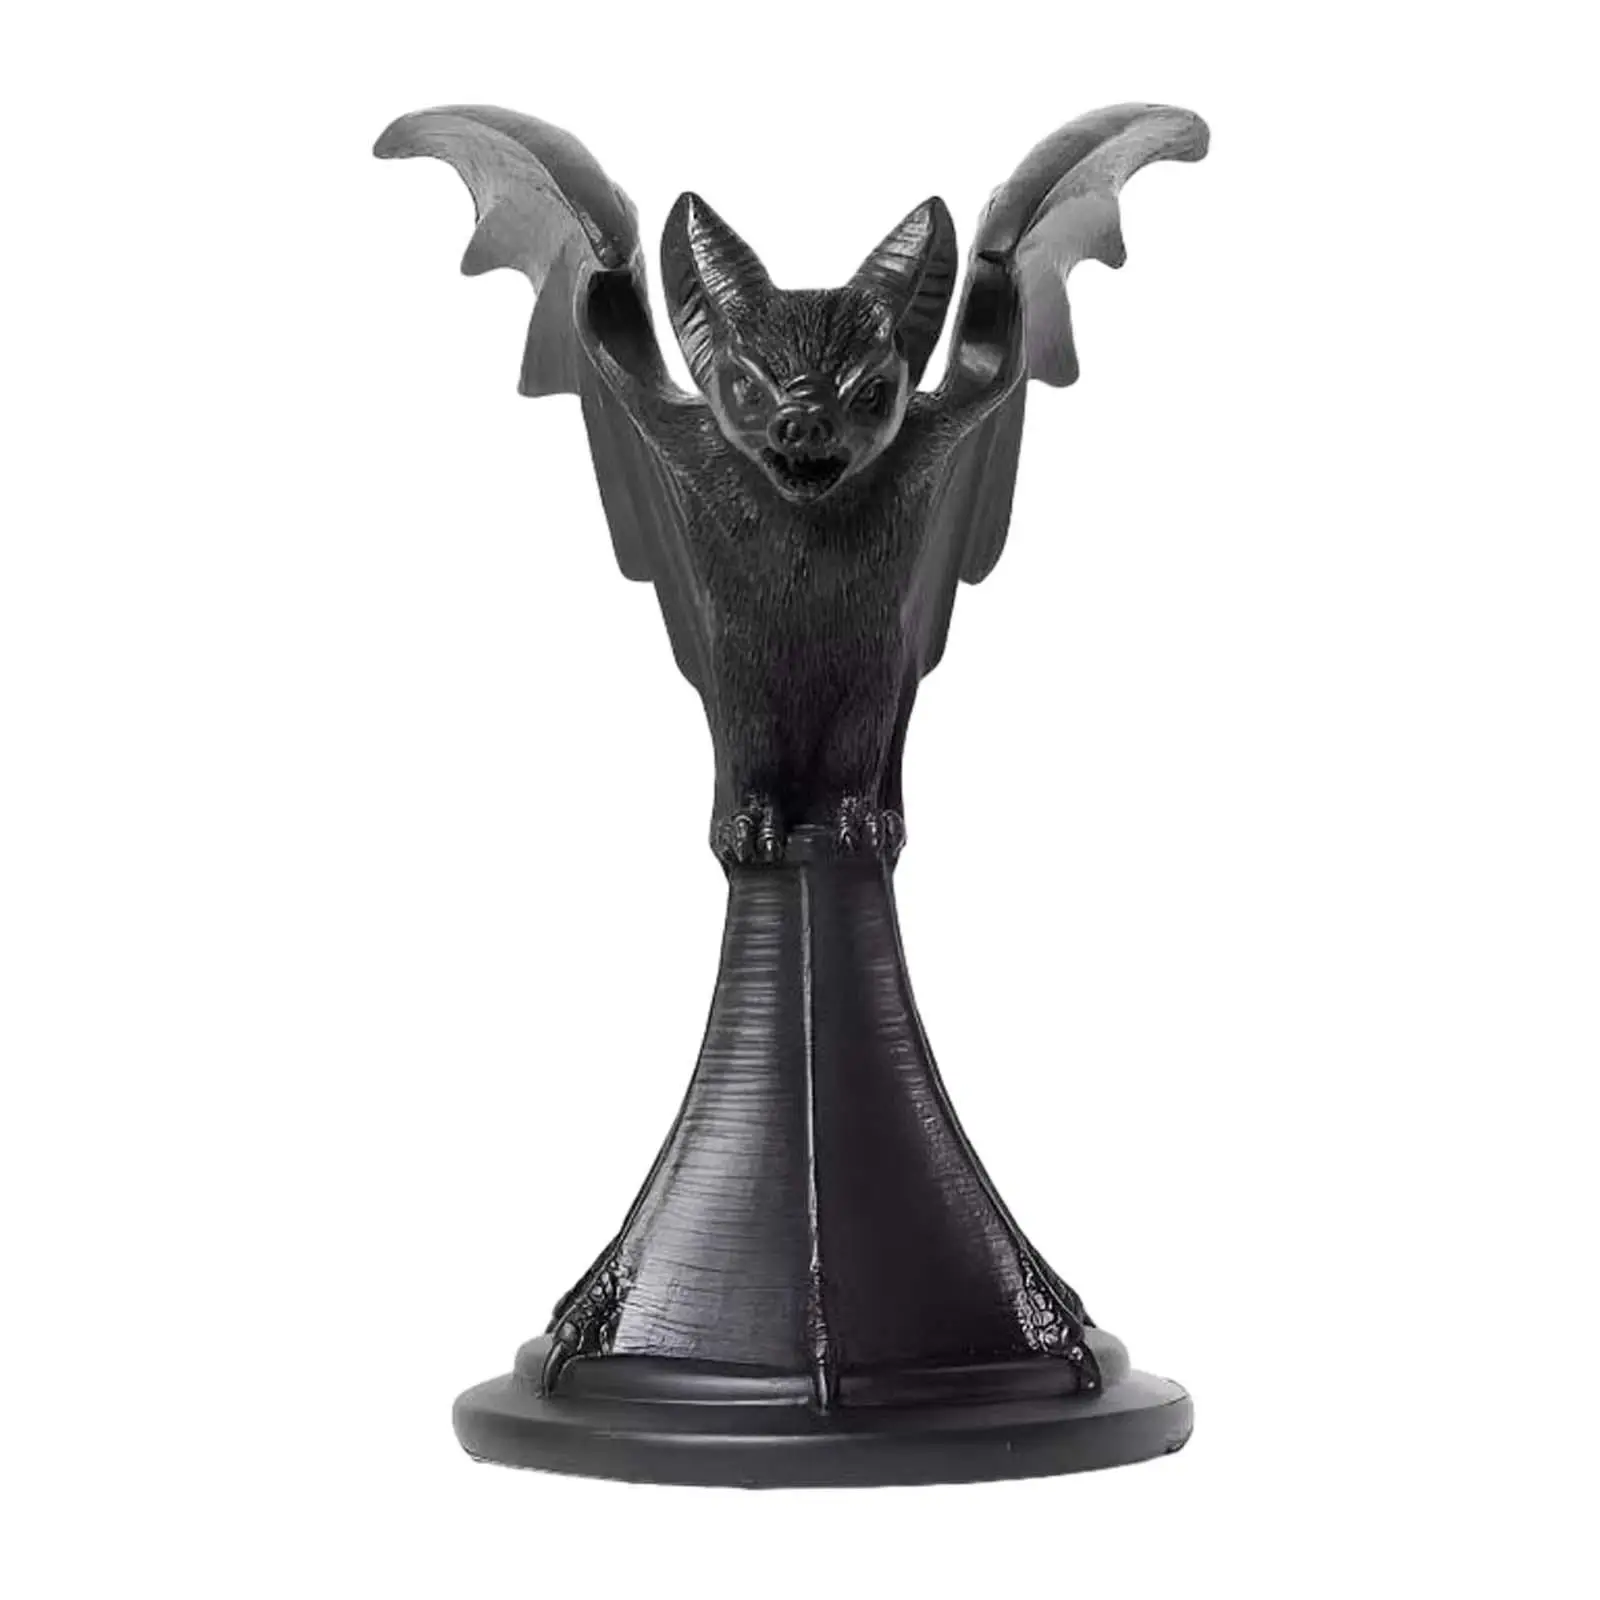 Candle Holder Candleholder Home Decor Accessory Halloween Gothic Candlestick